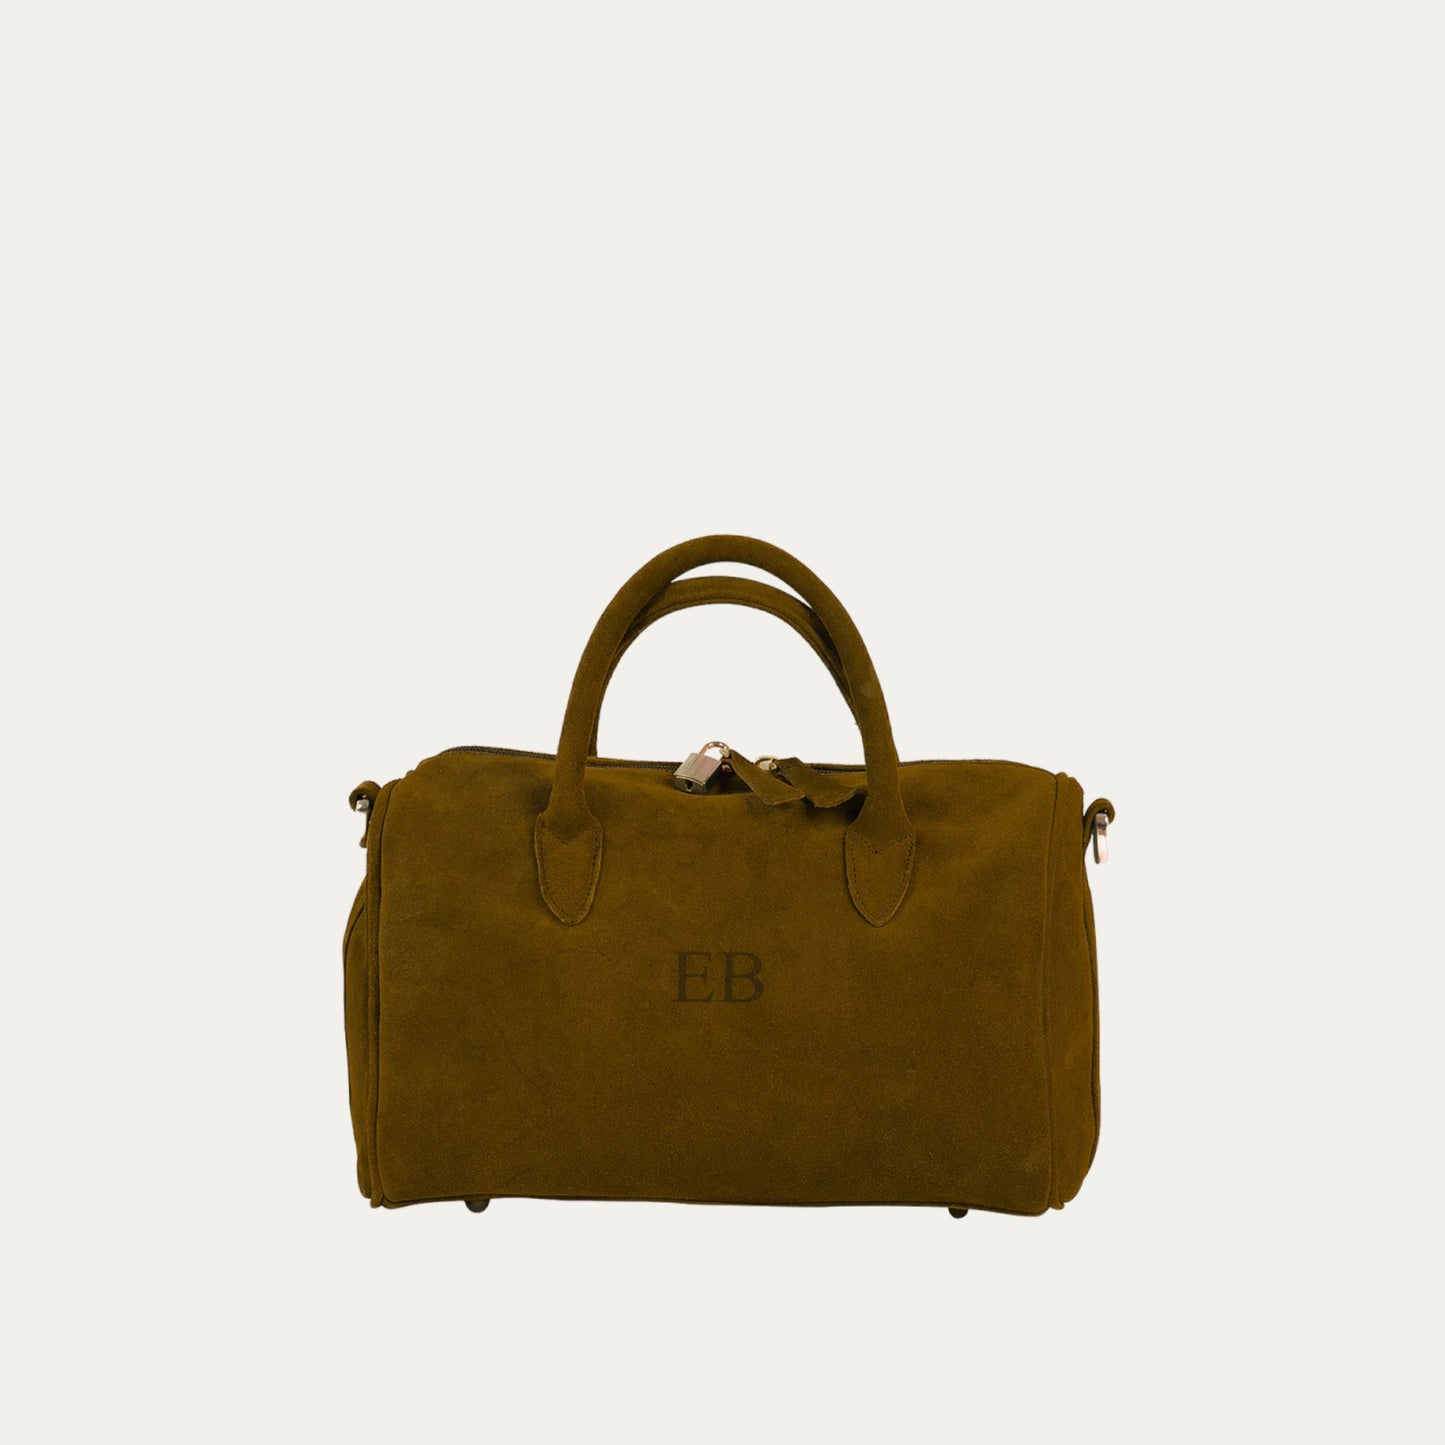 DAYBYDAY CATANIA '30 - Suede Crust Leather Top Handle Bag